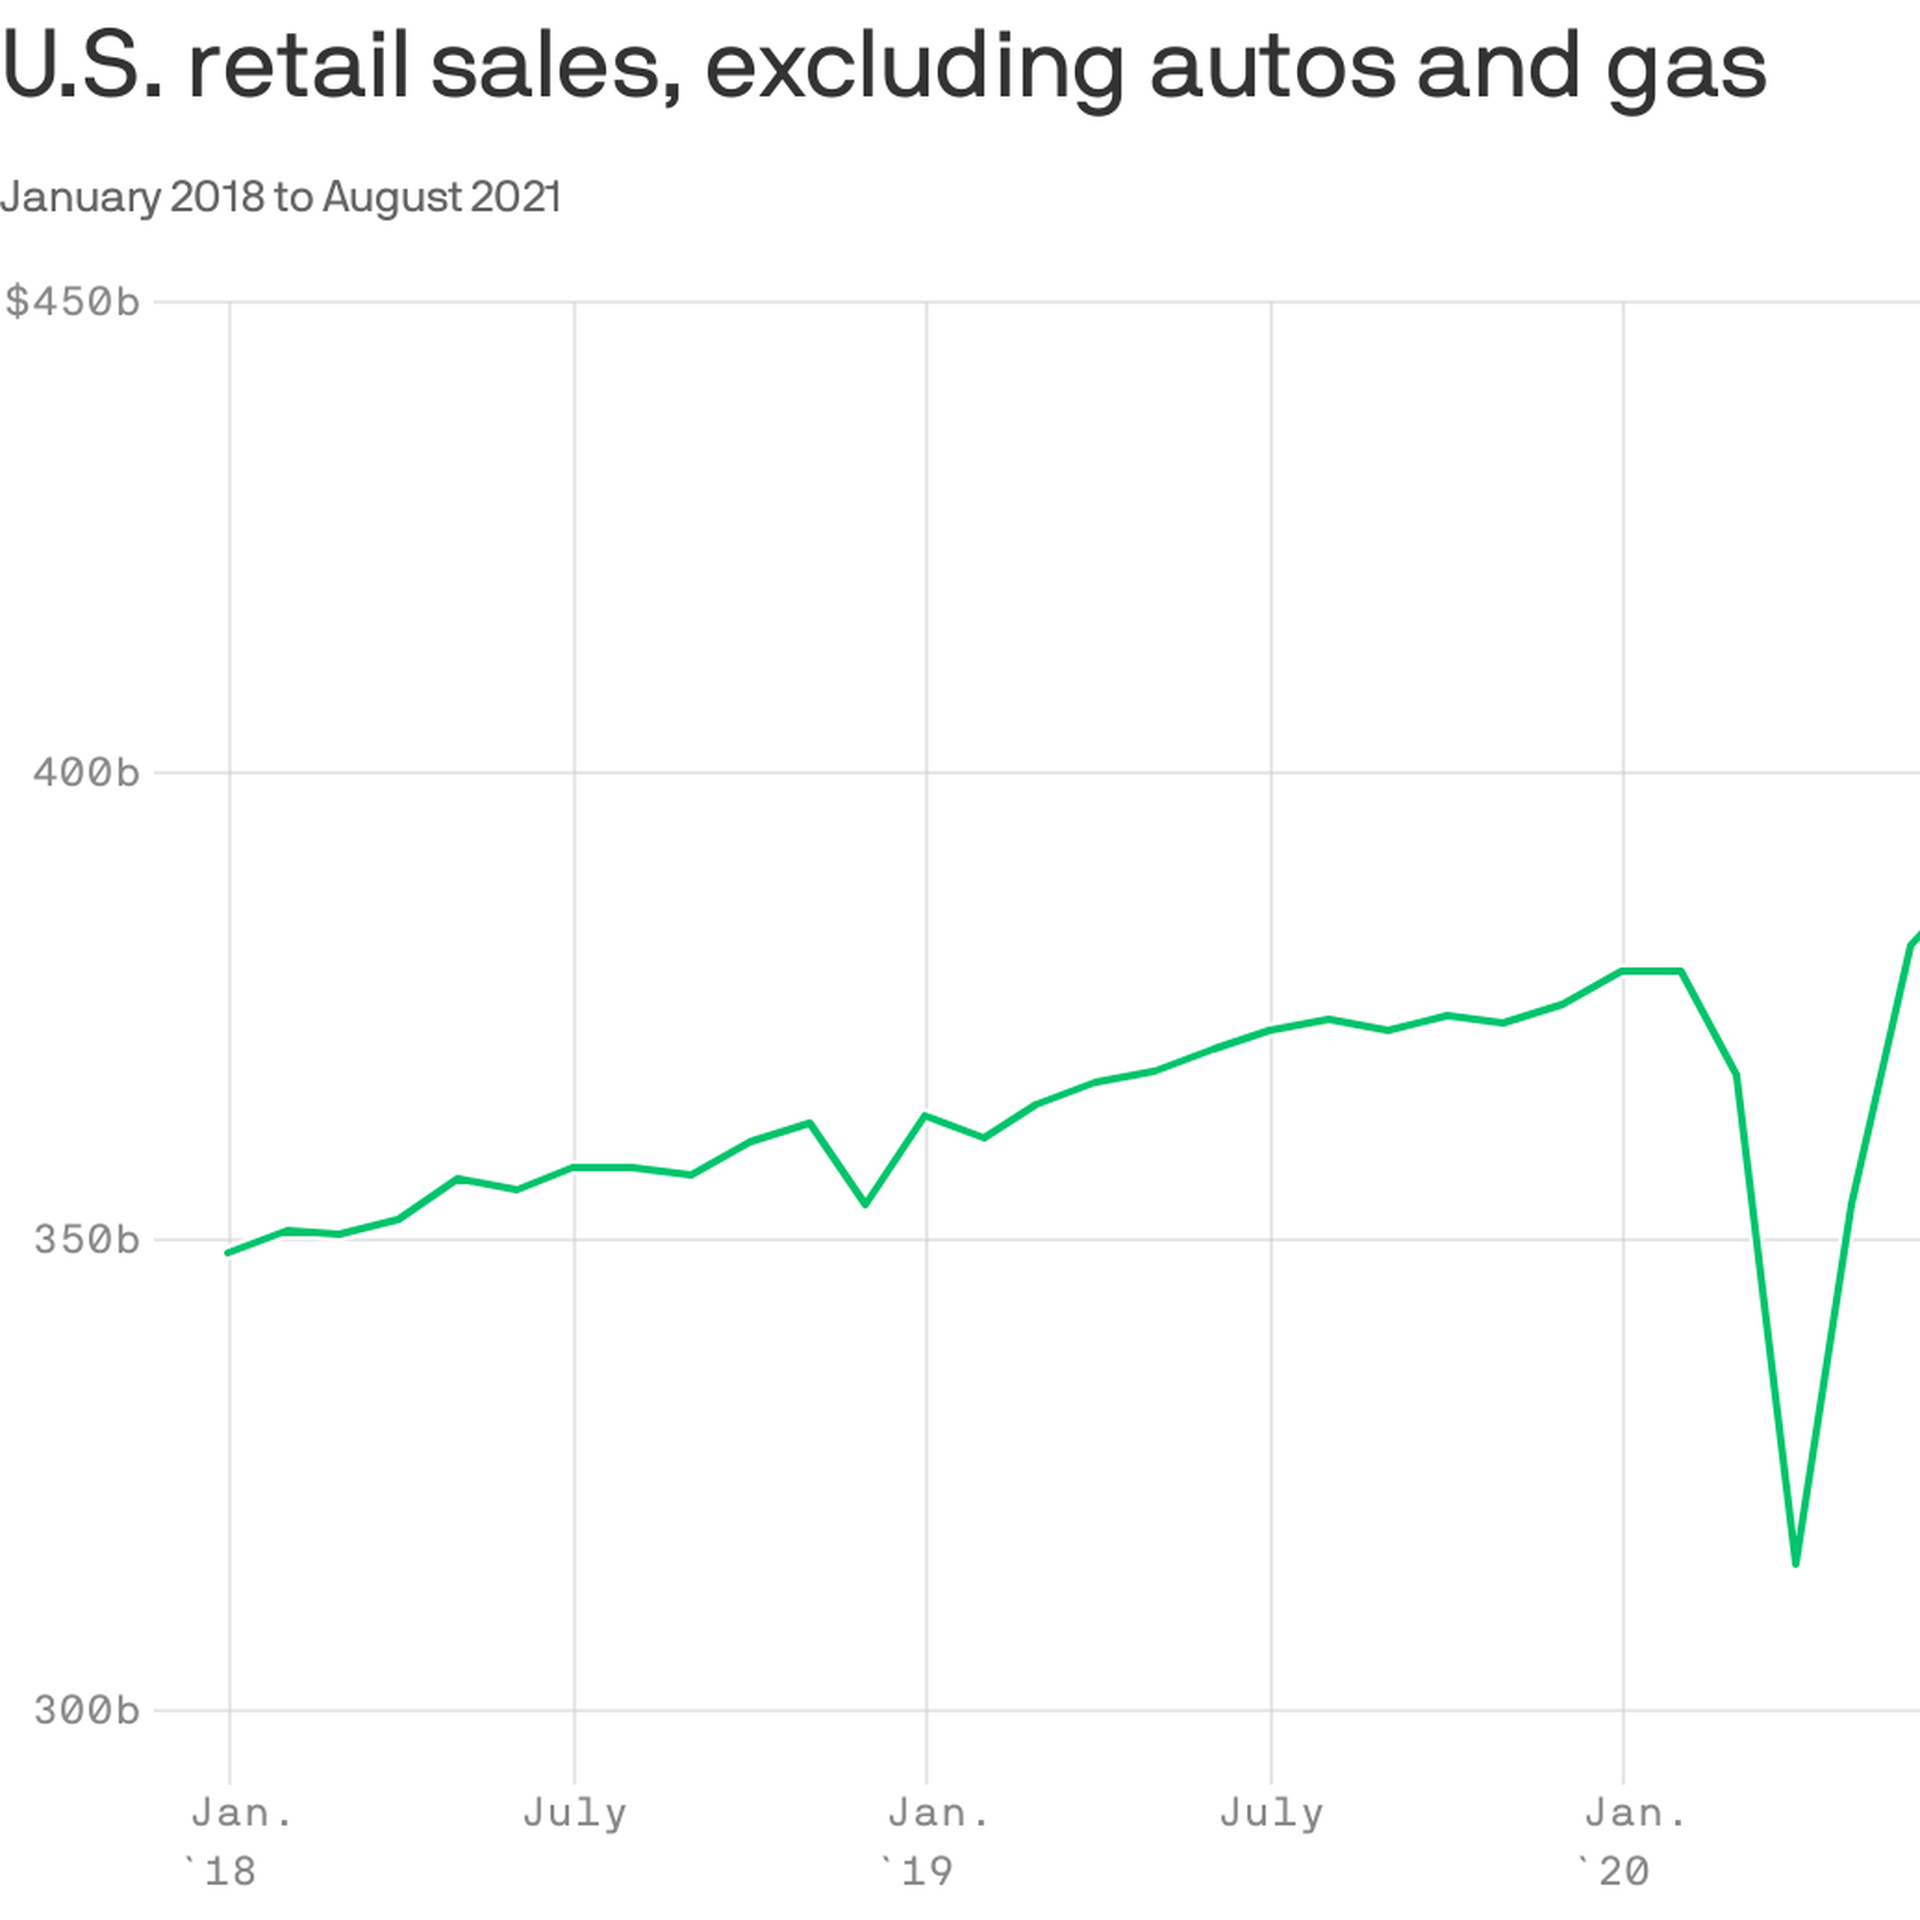 A chart showing U.S. retail sales, excluding autos and gas.